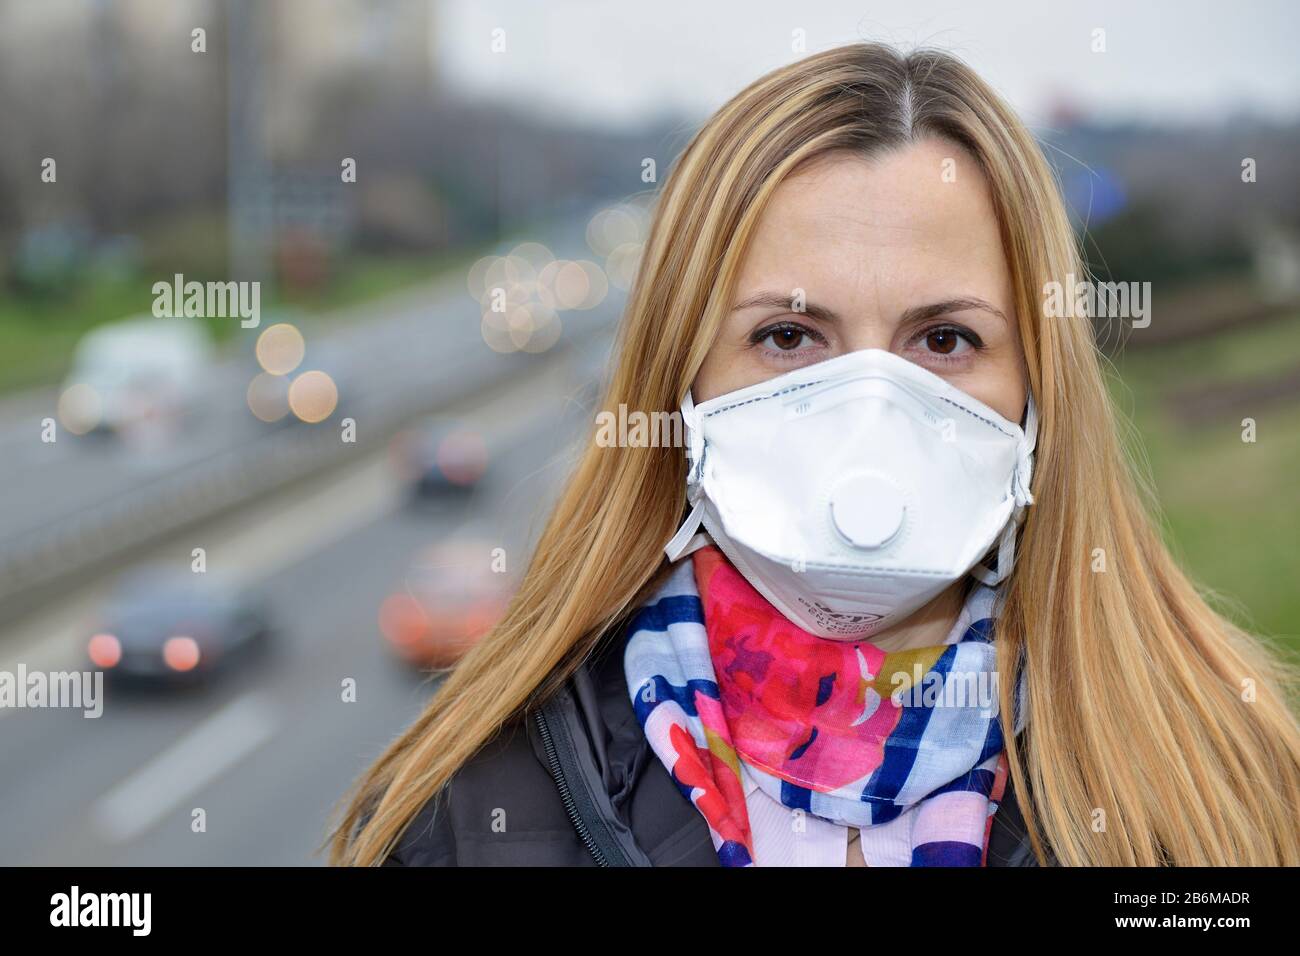 Coronavirus epidemic, woman wearing a face mask in city street as the number of Covid 19 virus cases across Europe continues to grow, Belgrade, Serbia Stock Photo